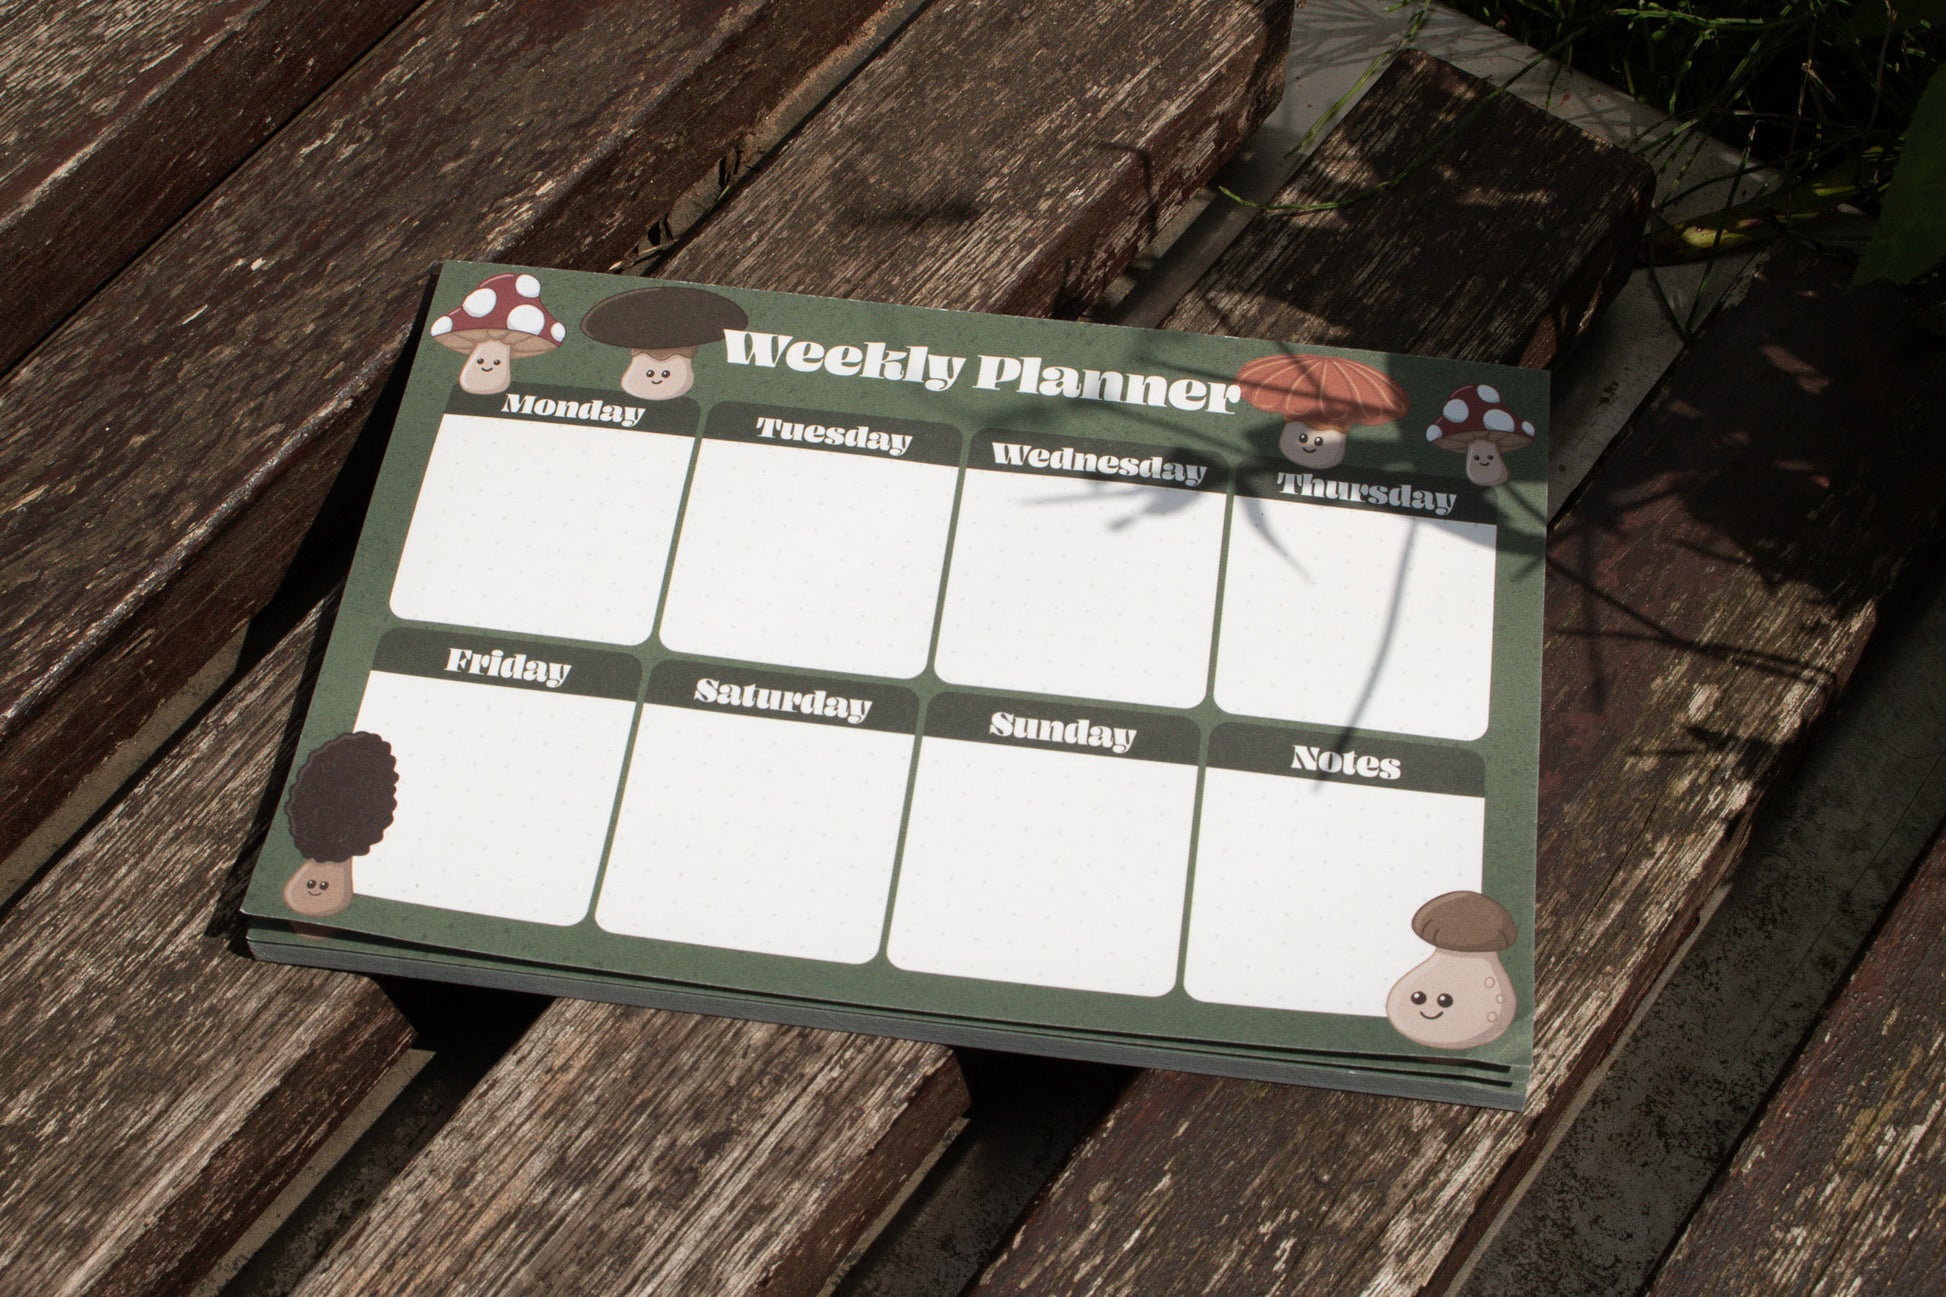 A5 Weekly Planner Pad with Mushroom Design by Mellow Apricot Studio - outside on wood